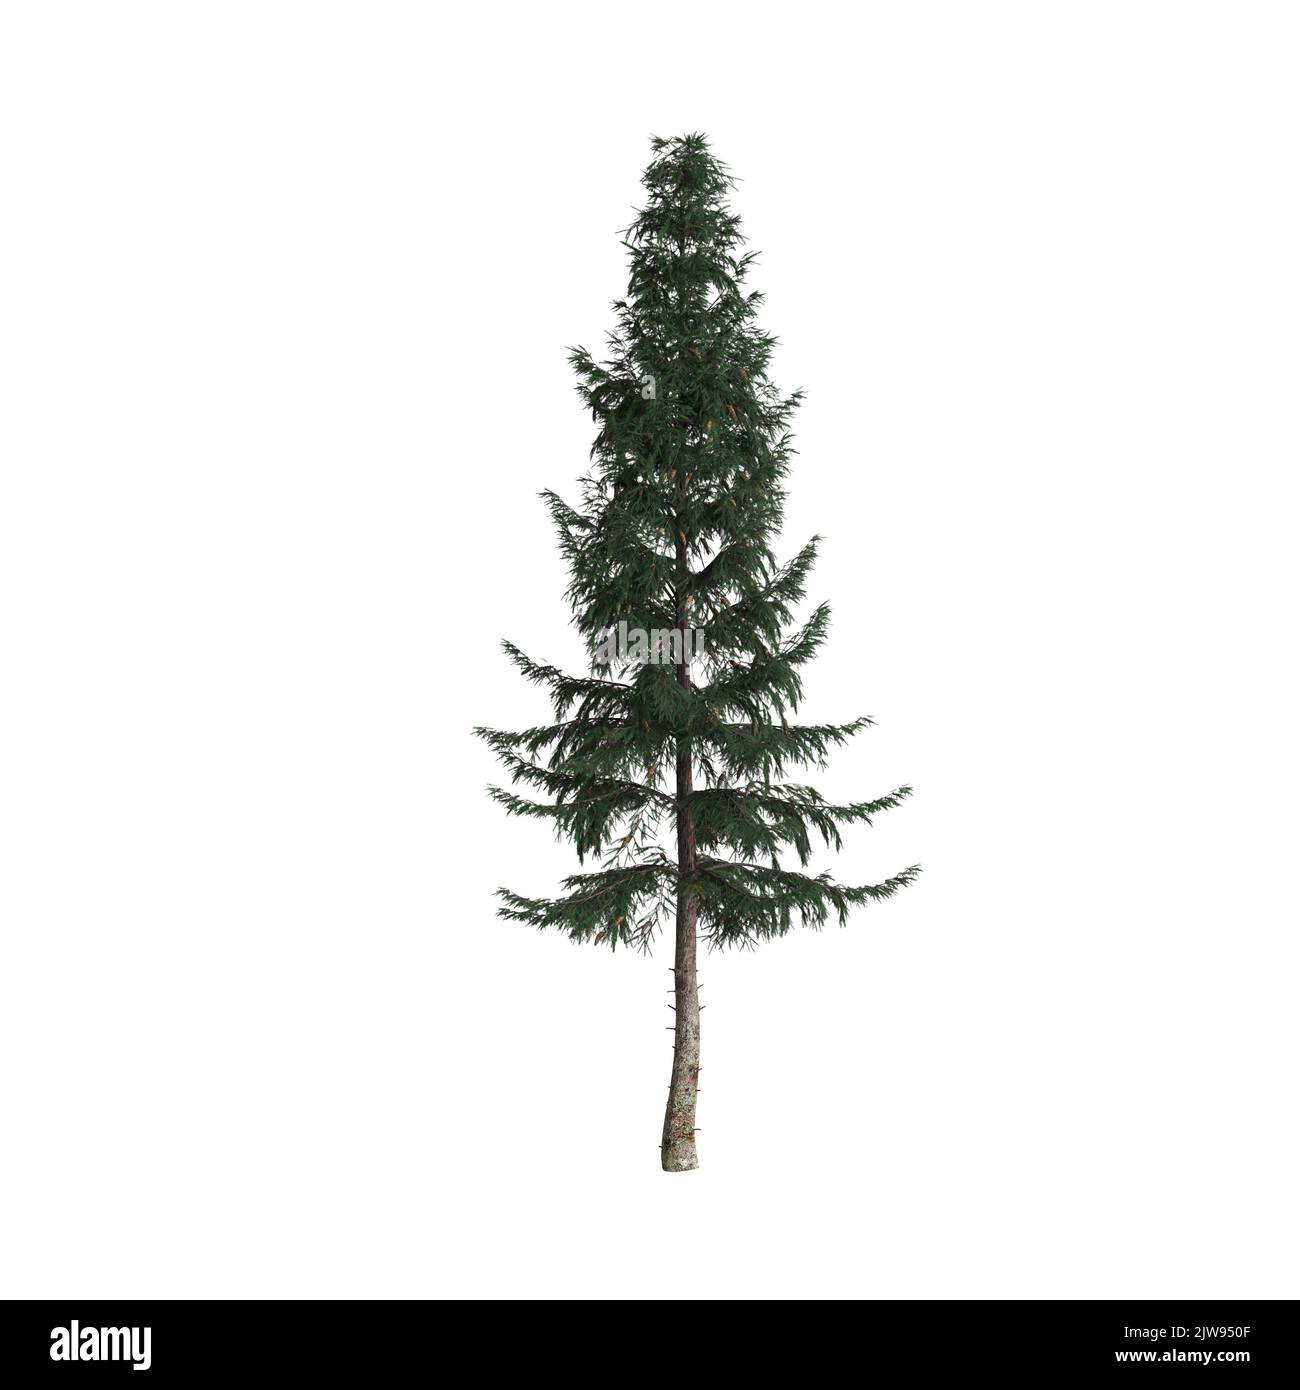 3d illustration of picea abies tree isolated on white background Stock Photo